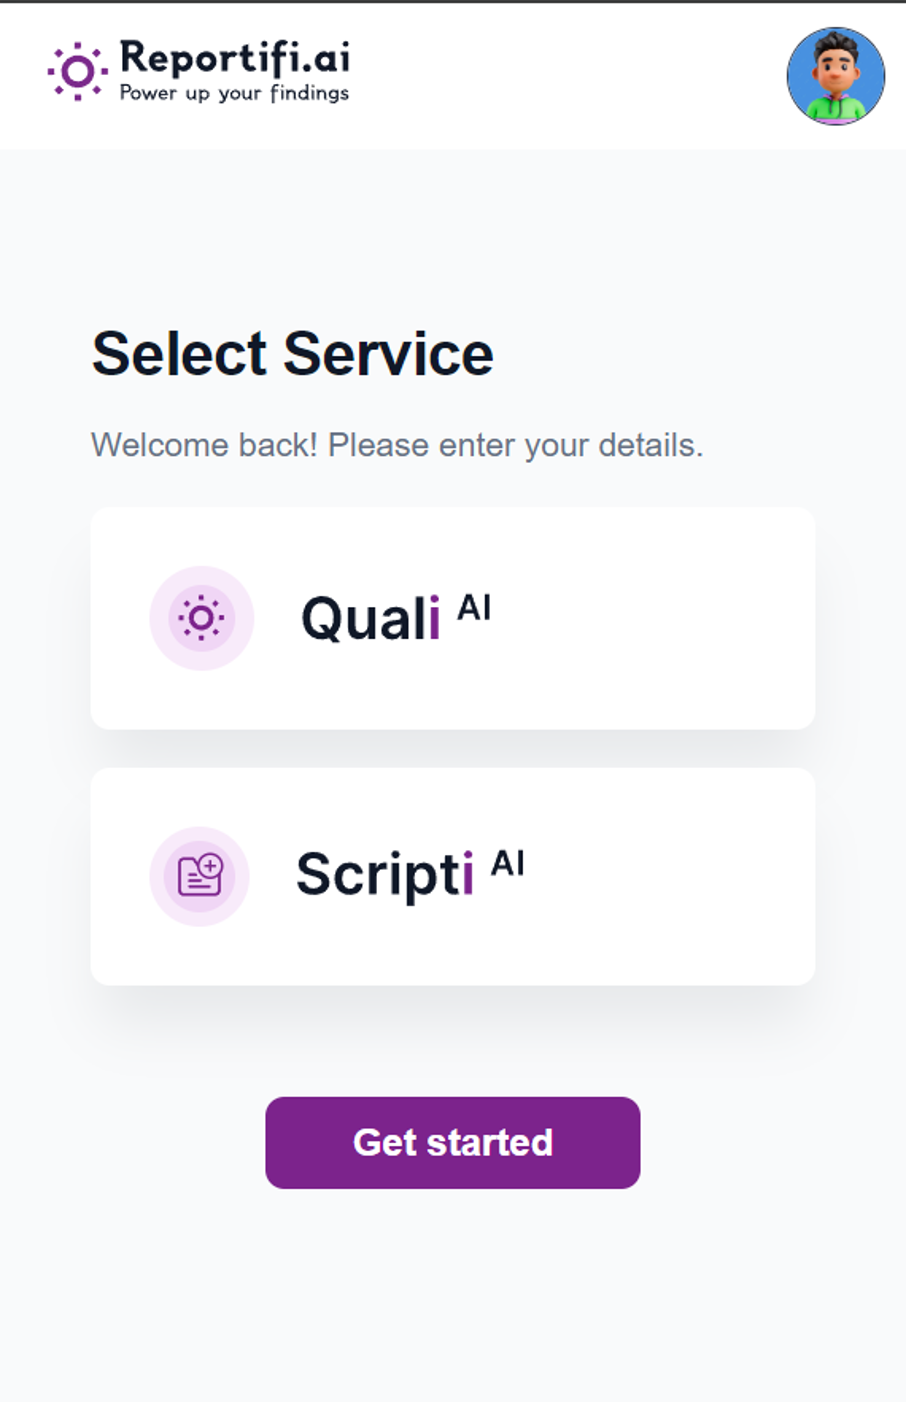 Select the Service